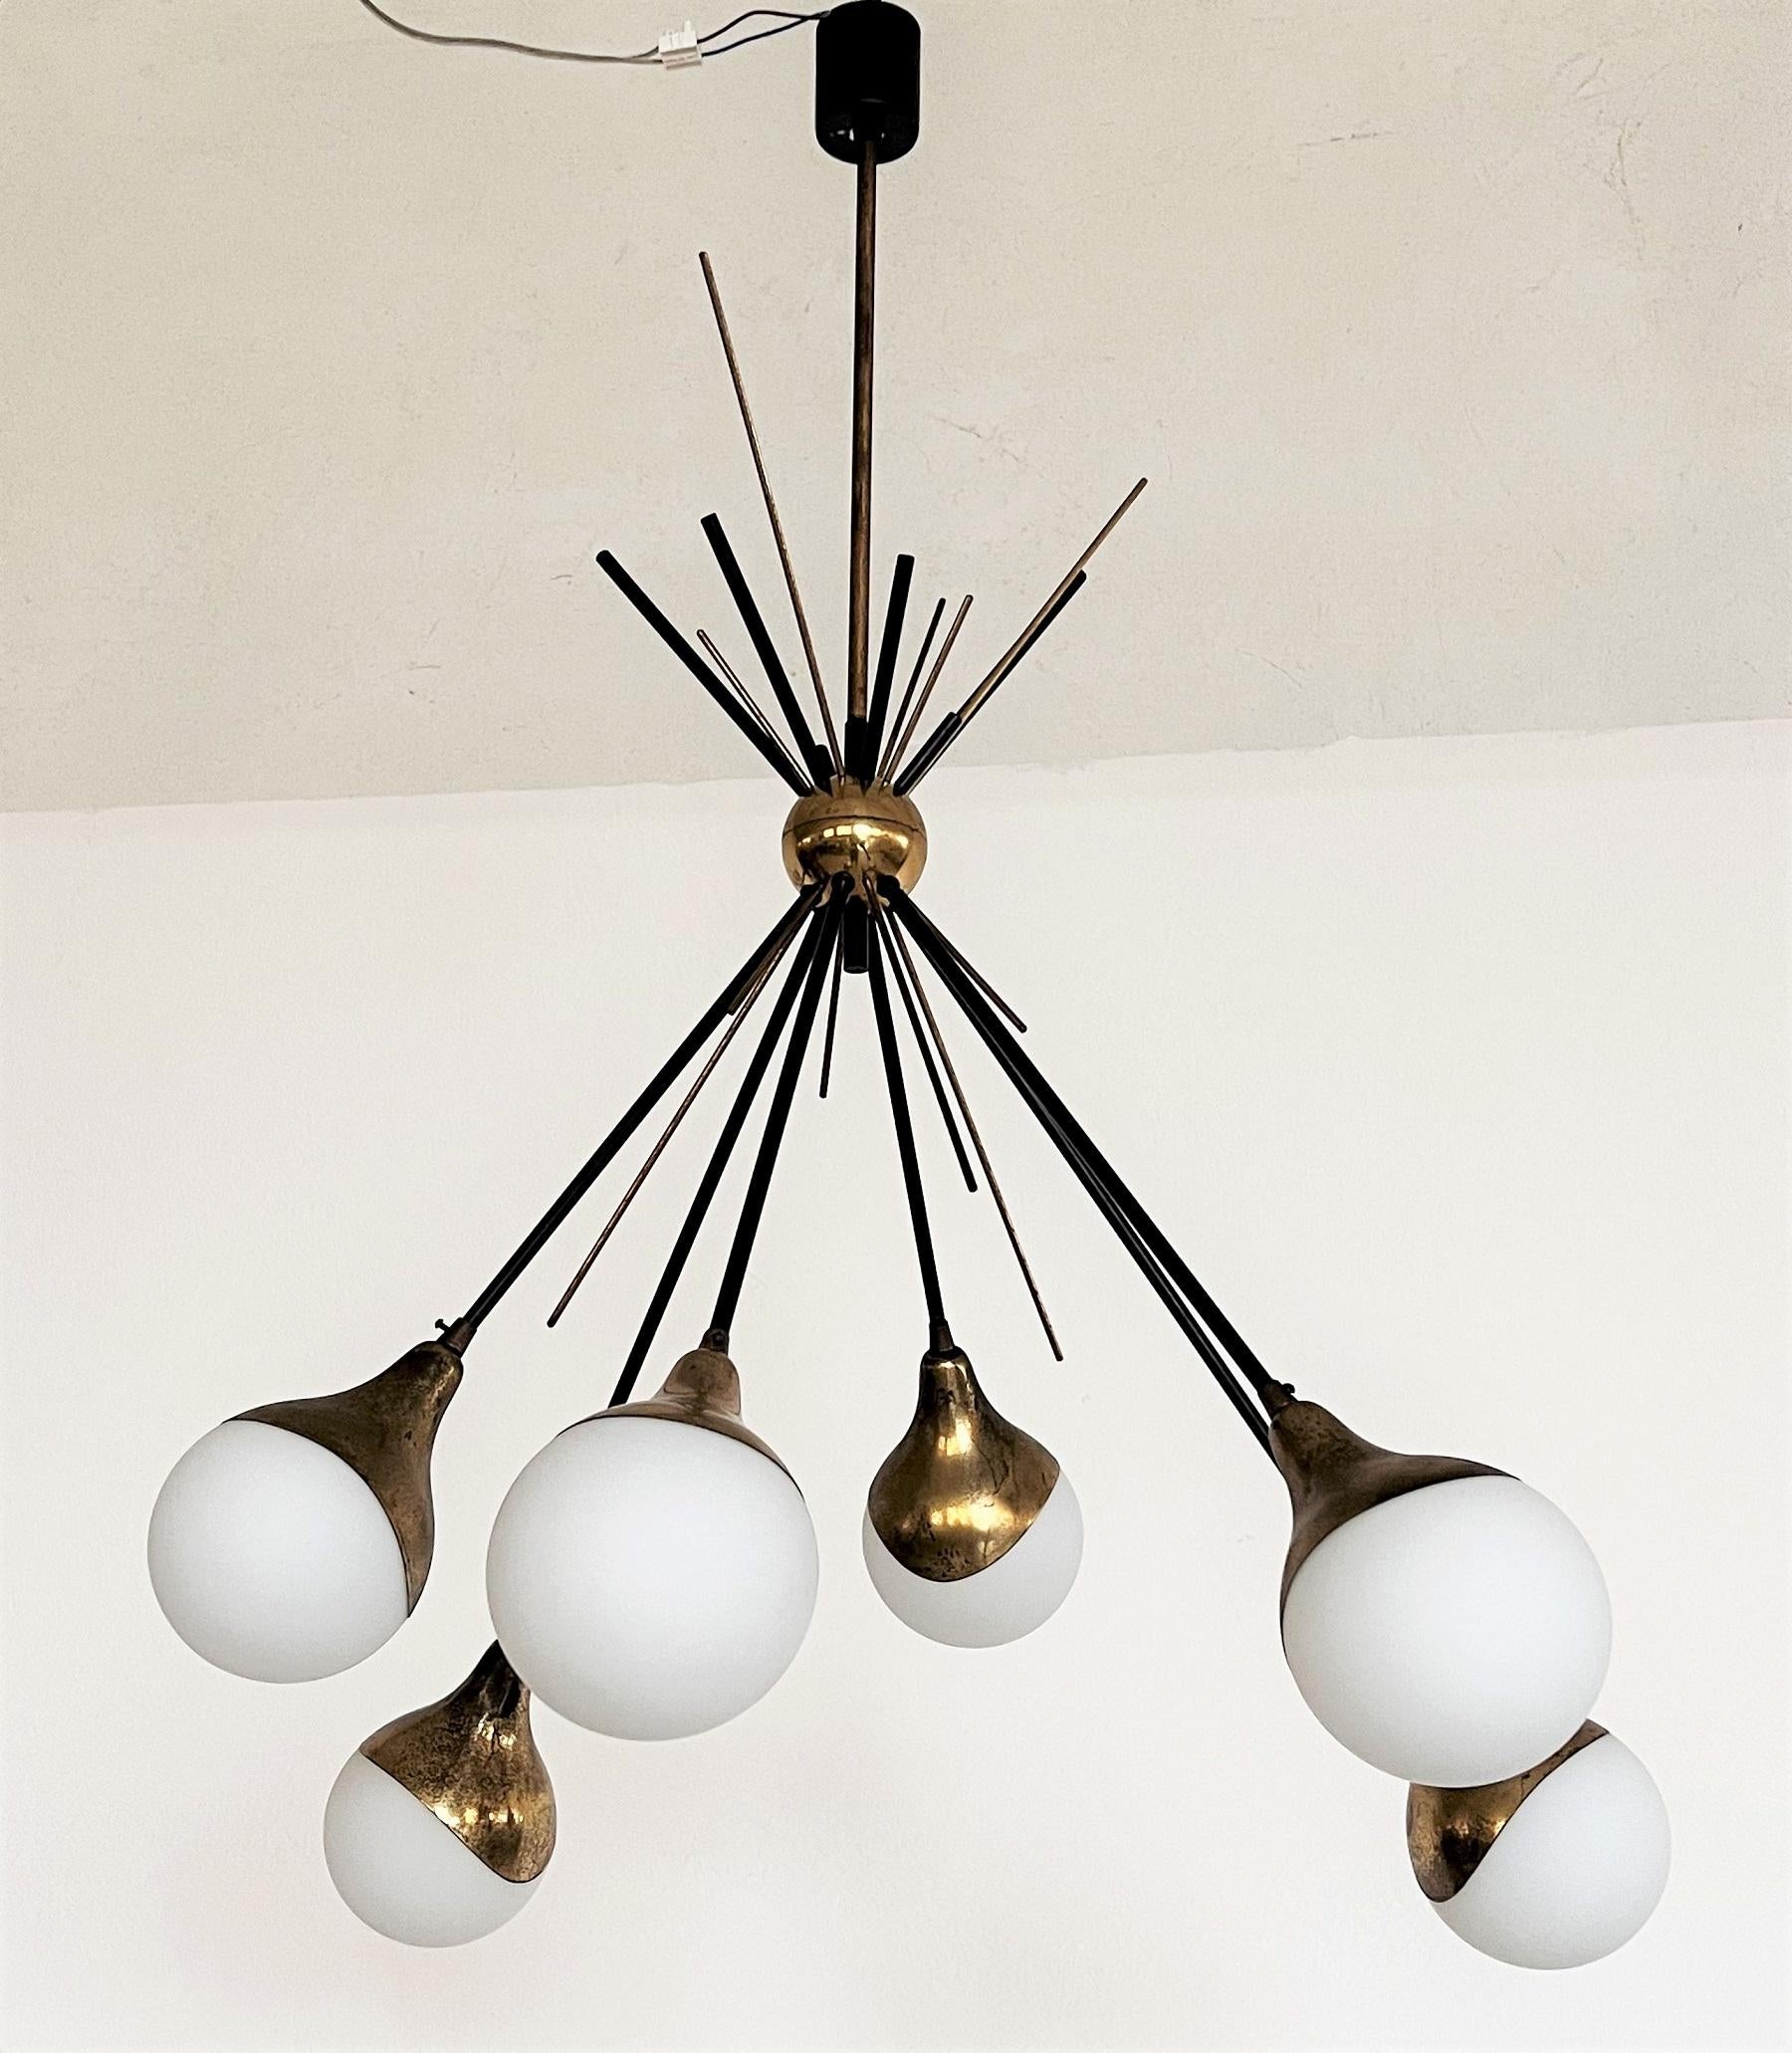 Beautiful original chandelier from Italy of the 1950s.
Made by the famous design manufacturer Stilnovo Italy.
The chandelier has a frame of brass and metal, partially painted black, which is built like a sputnik.
At the end of the long brass rods